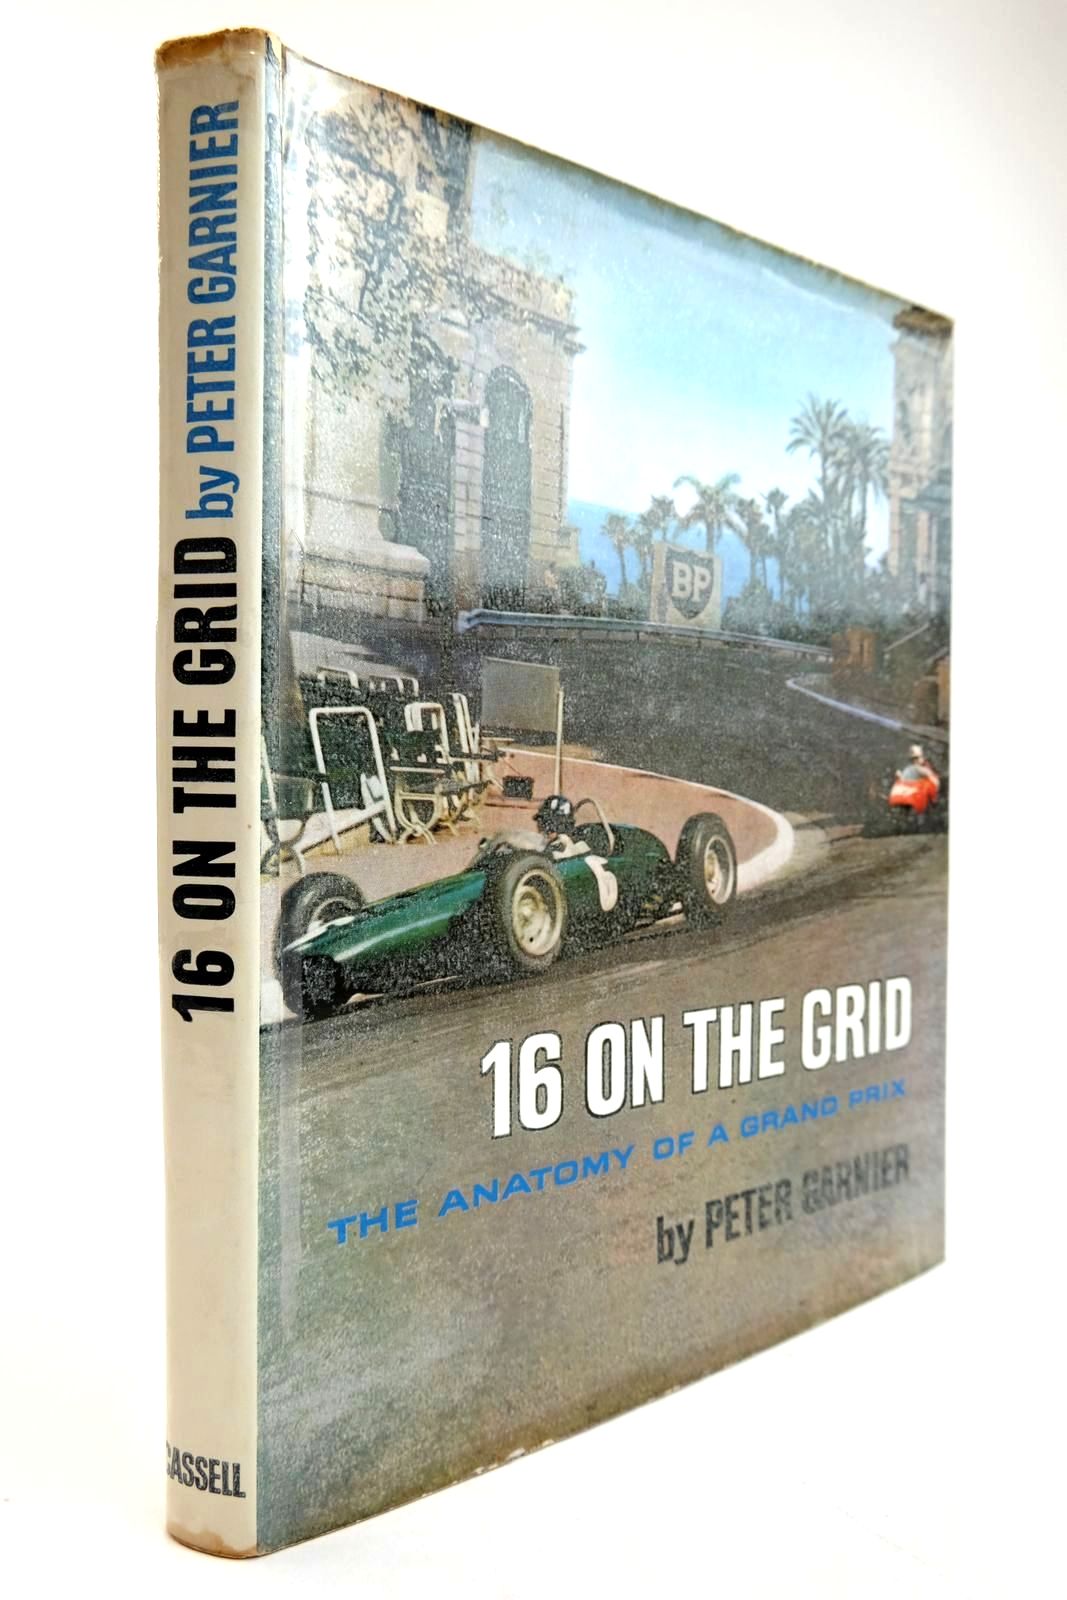 Photo of 16 ON THE GRID: THE ANATOMY OF A GRAND PRIX written by Garnier, Peter published by Cassell & Company Limited (STOCK CODE: 2134309)  for sale by Stella & Rose's Books